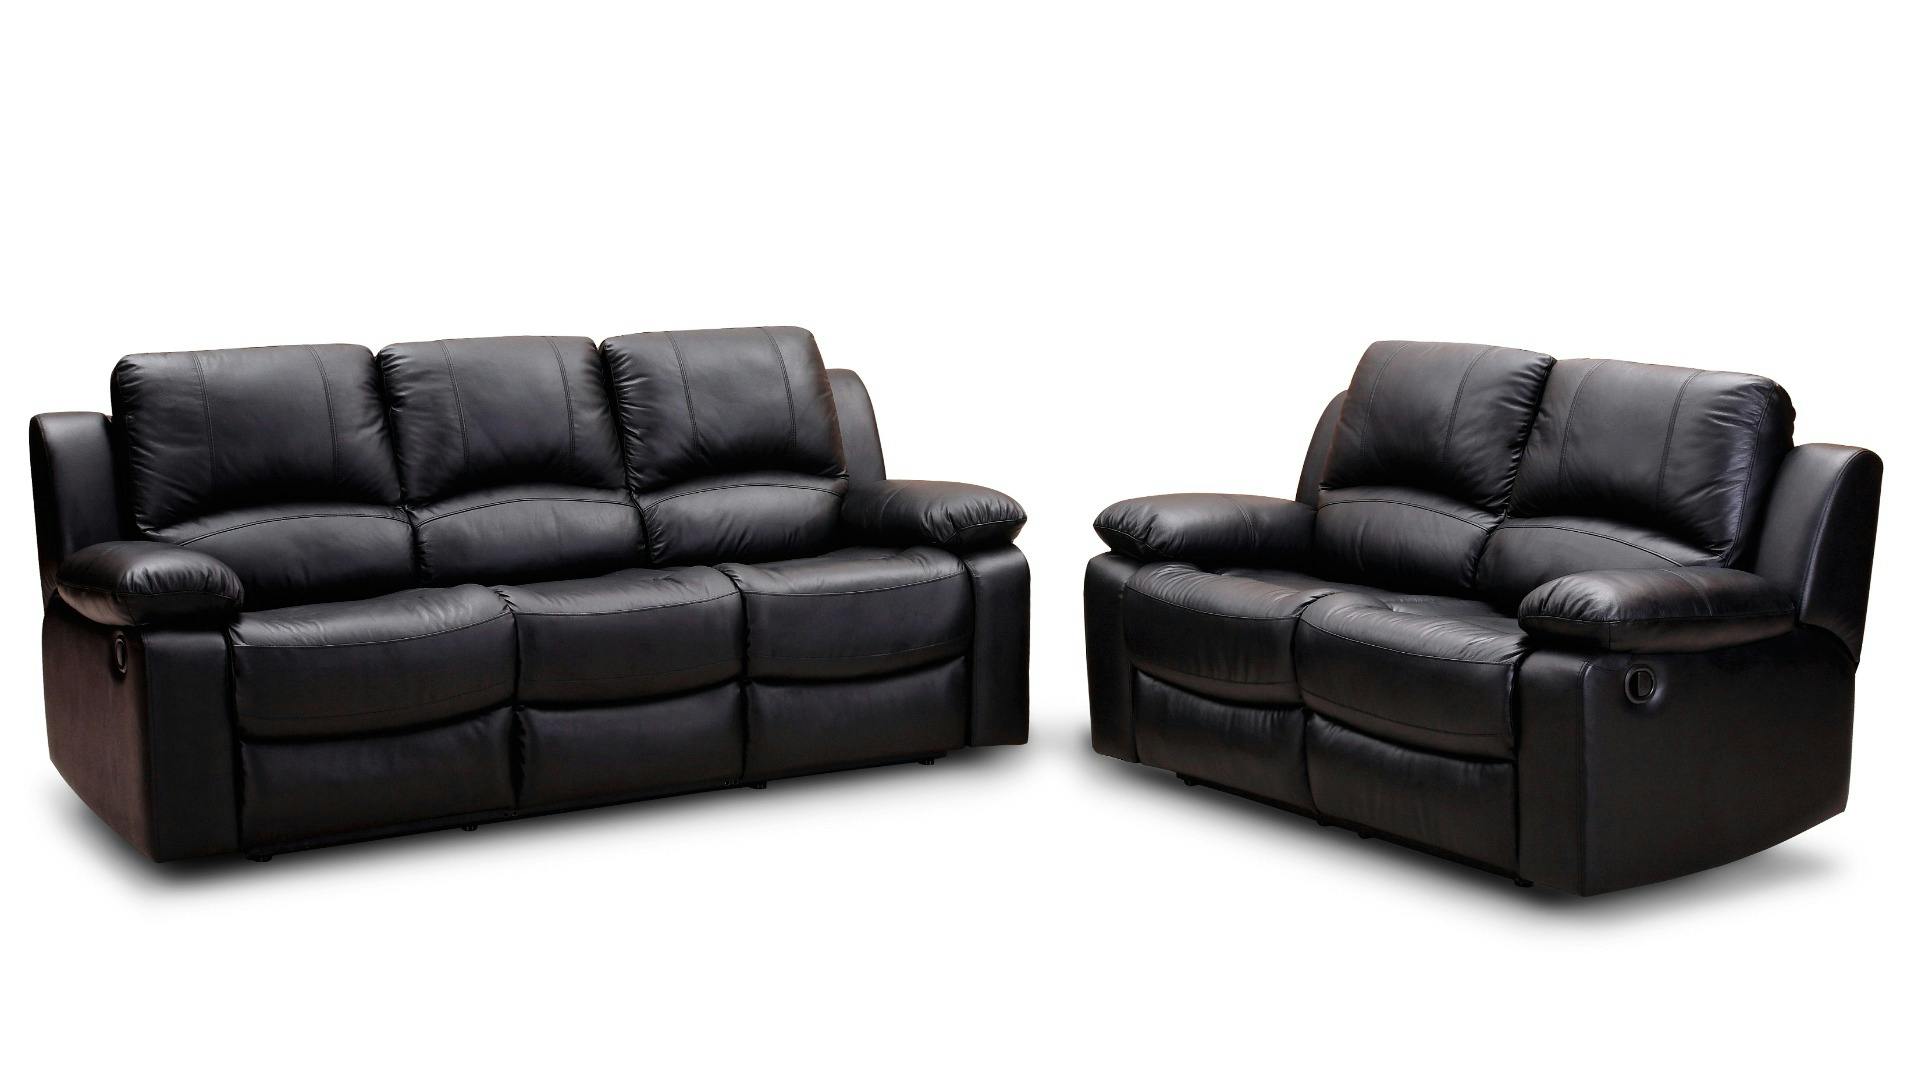  Black  Leather Padded Cushion Couch  Near to Black  Leather 